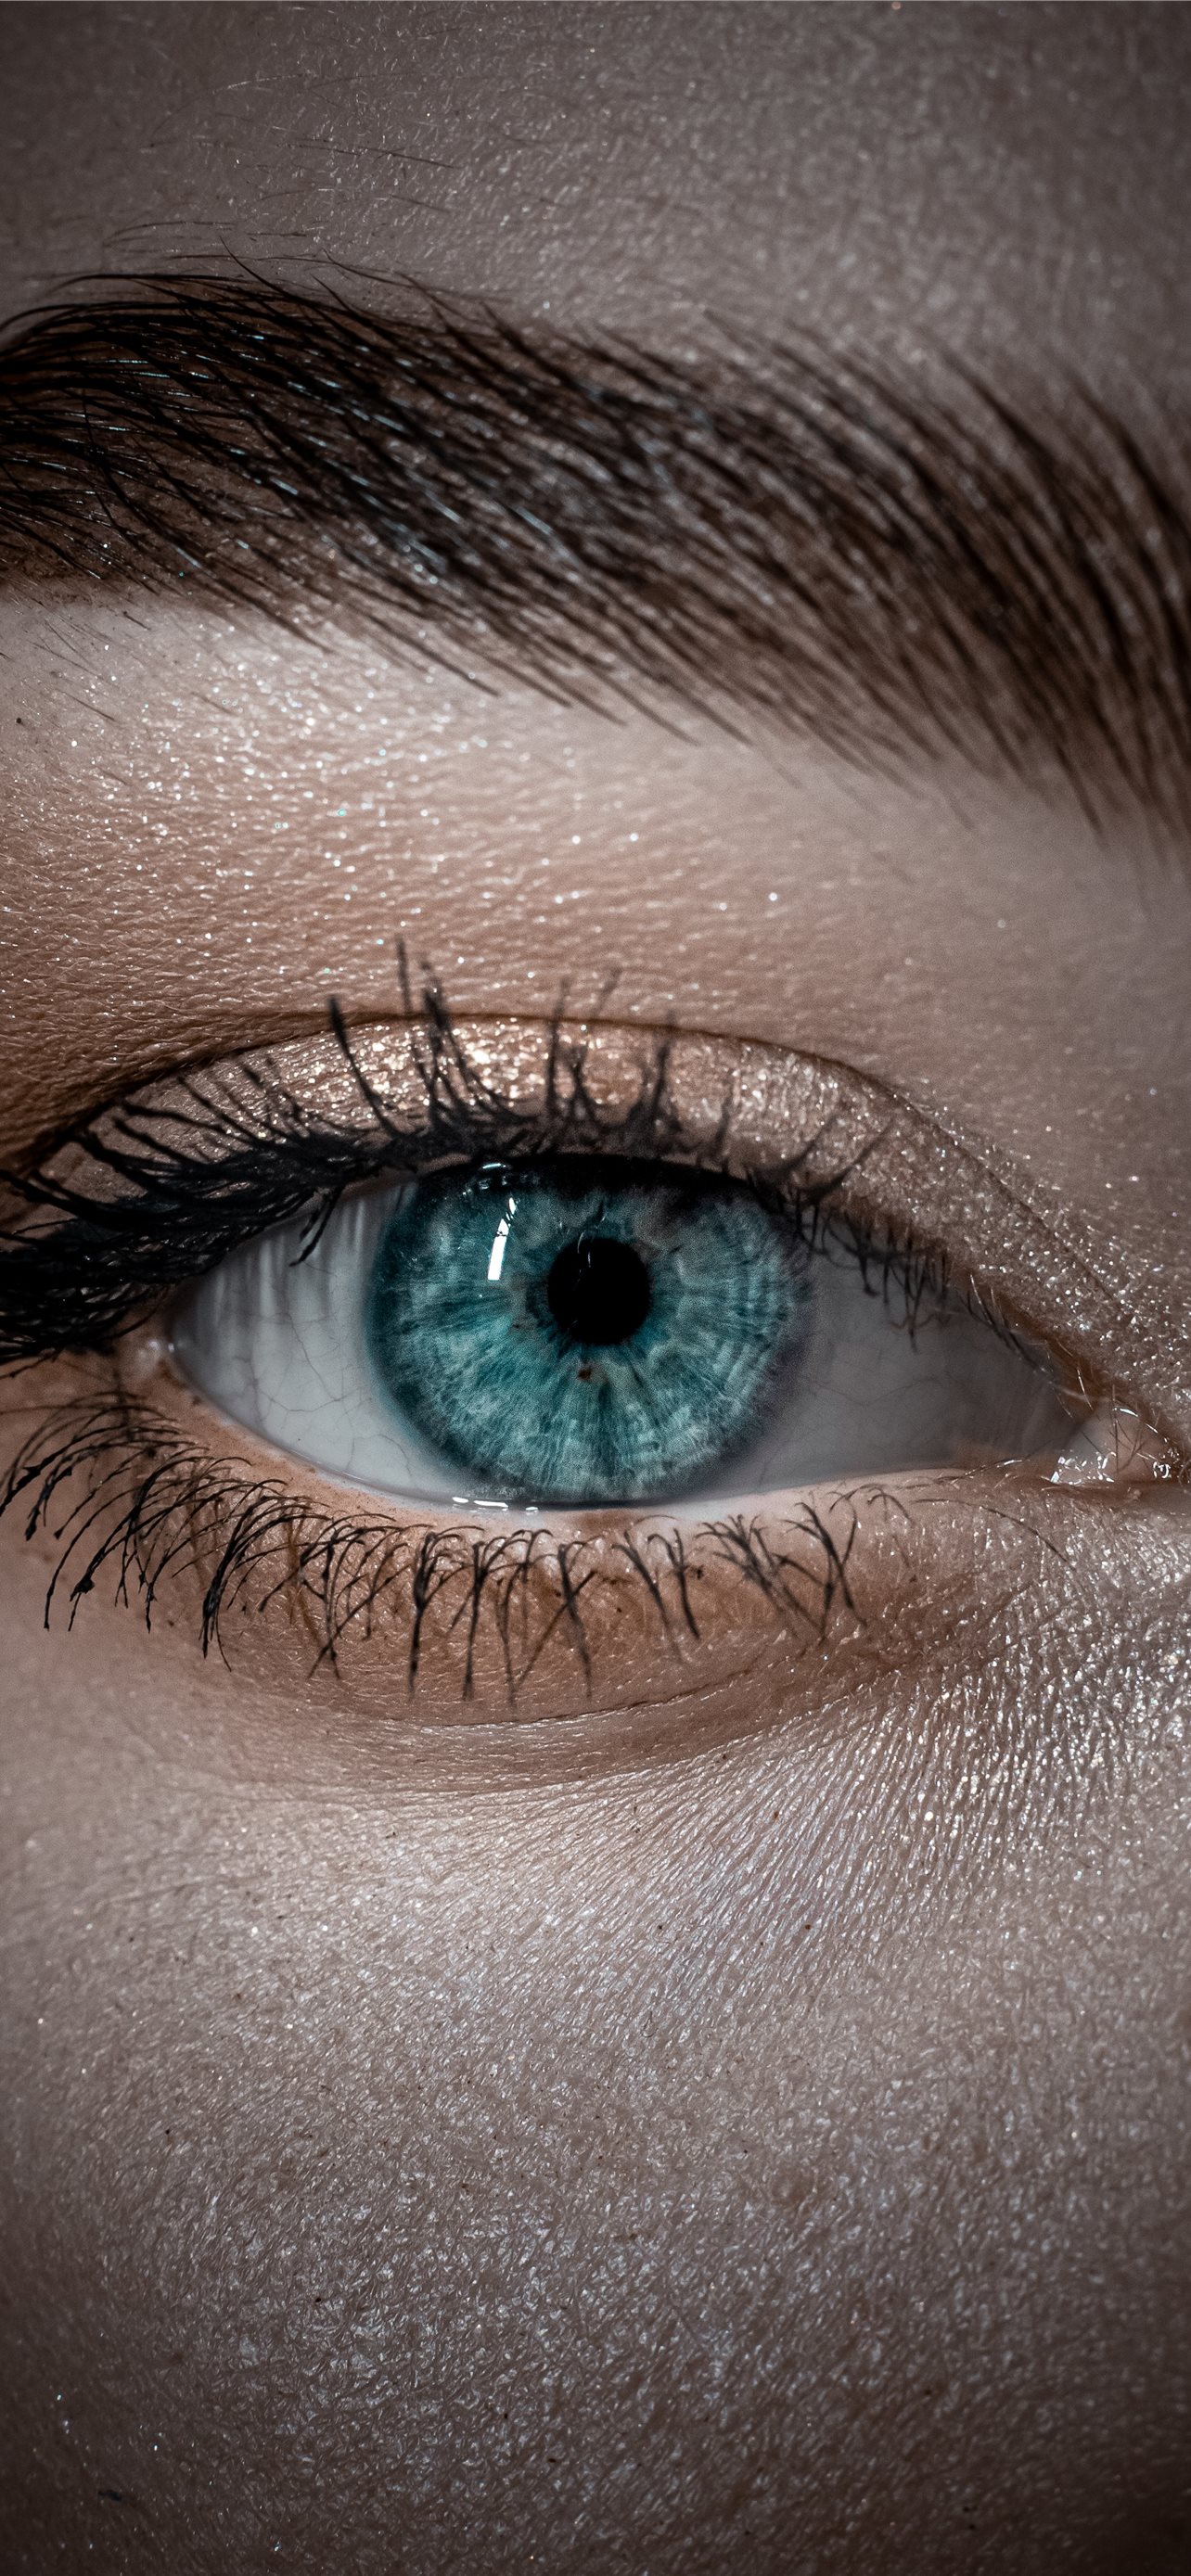 persons blue eyes in close up photography iPhone wallpaper 